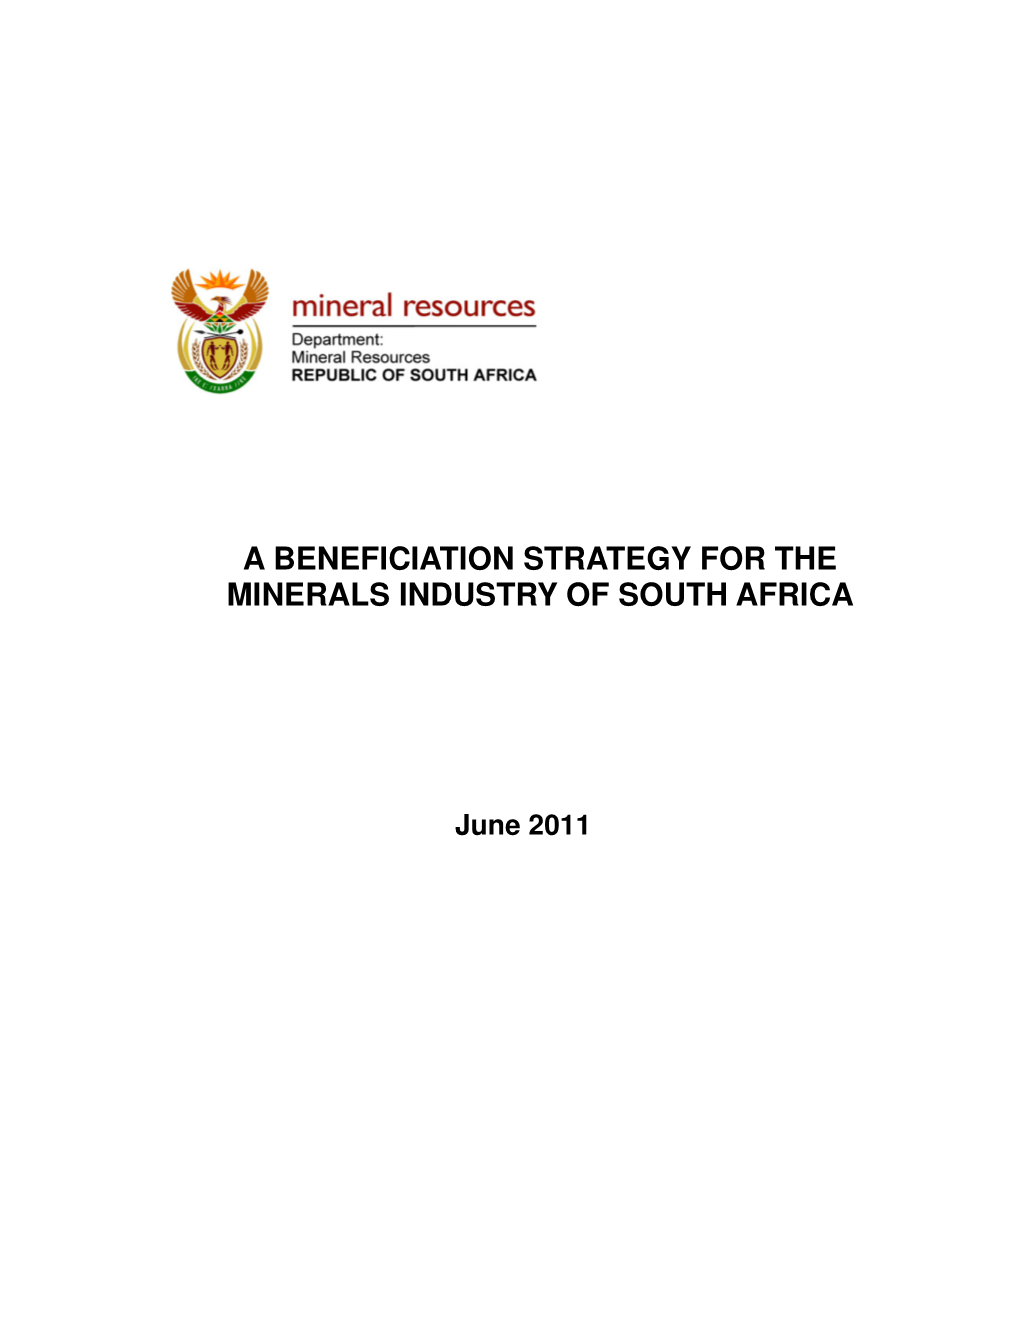 Beneficiation Strategy for Minerals Industry in South Africa